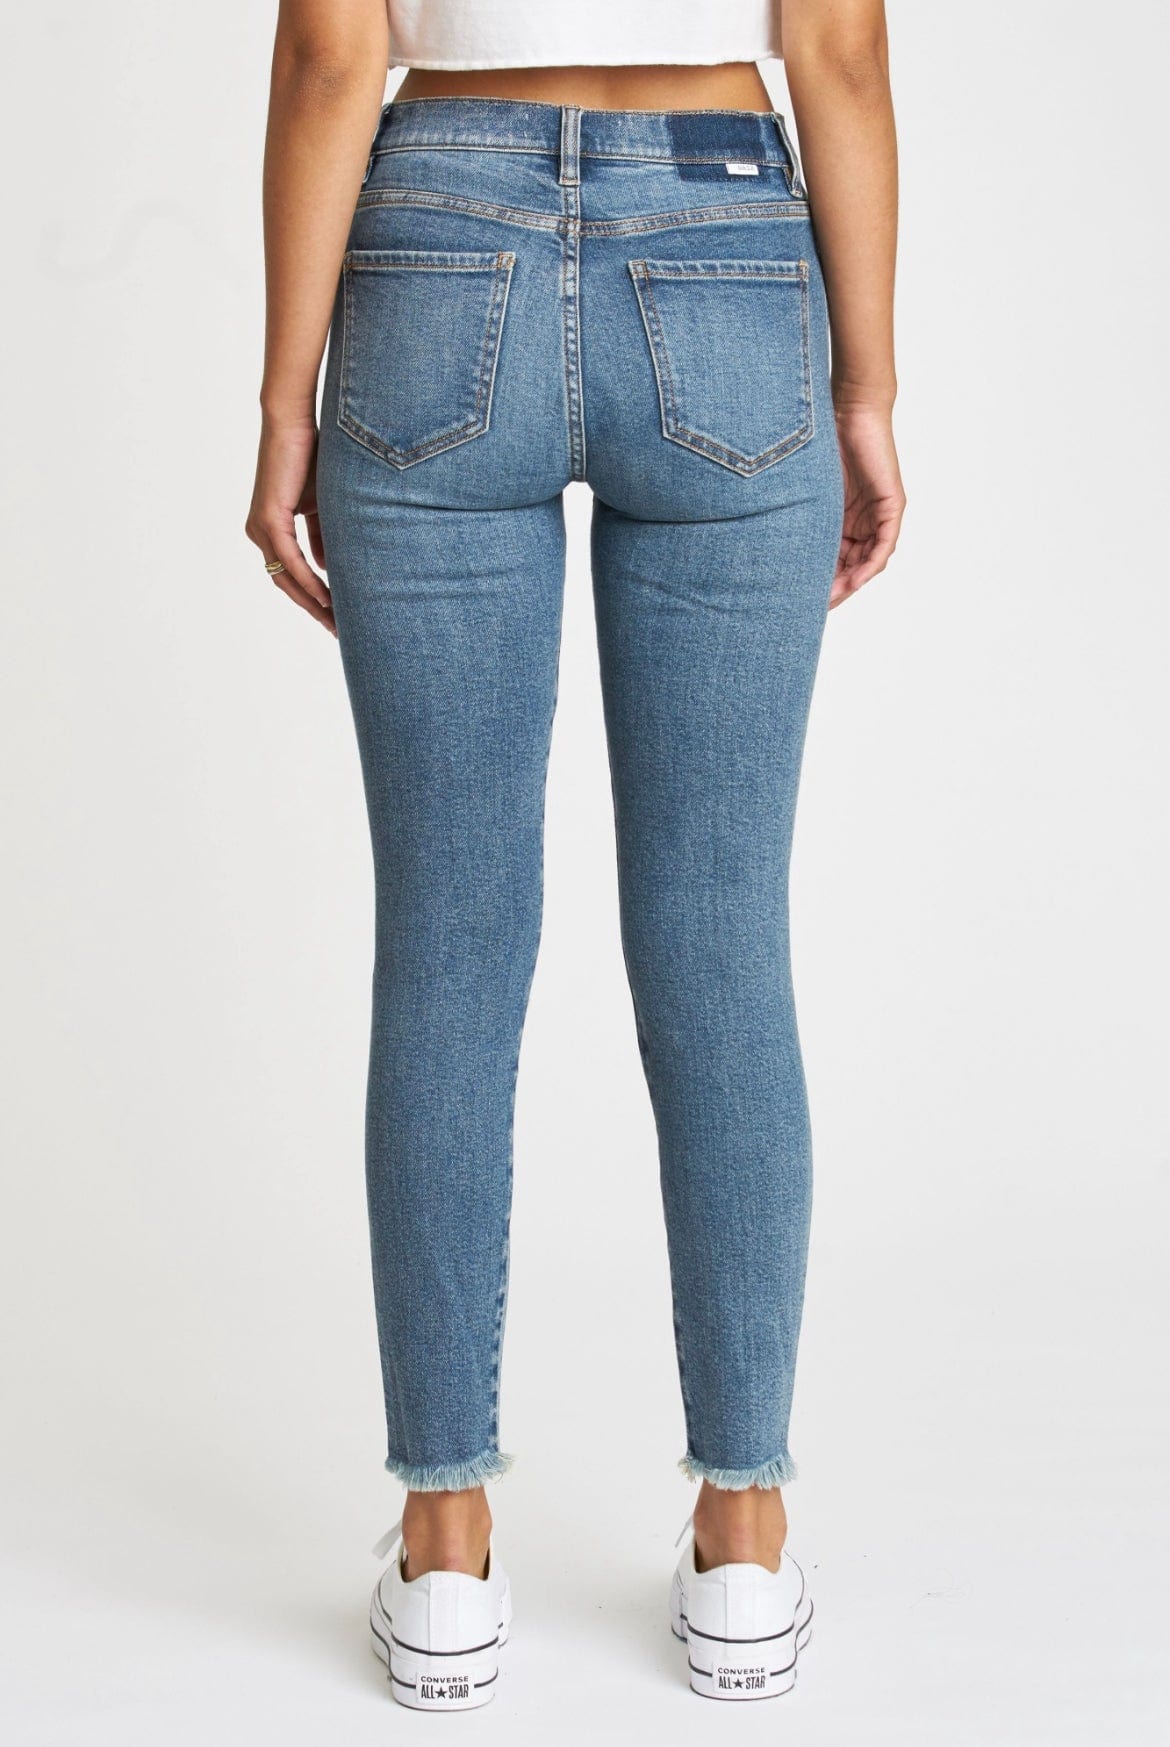 Moneymaker High Rise Skinny Jeans in Fawn - Pants - Blooming Daily